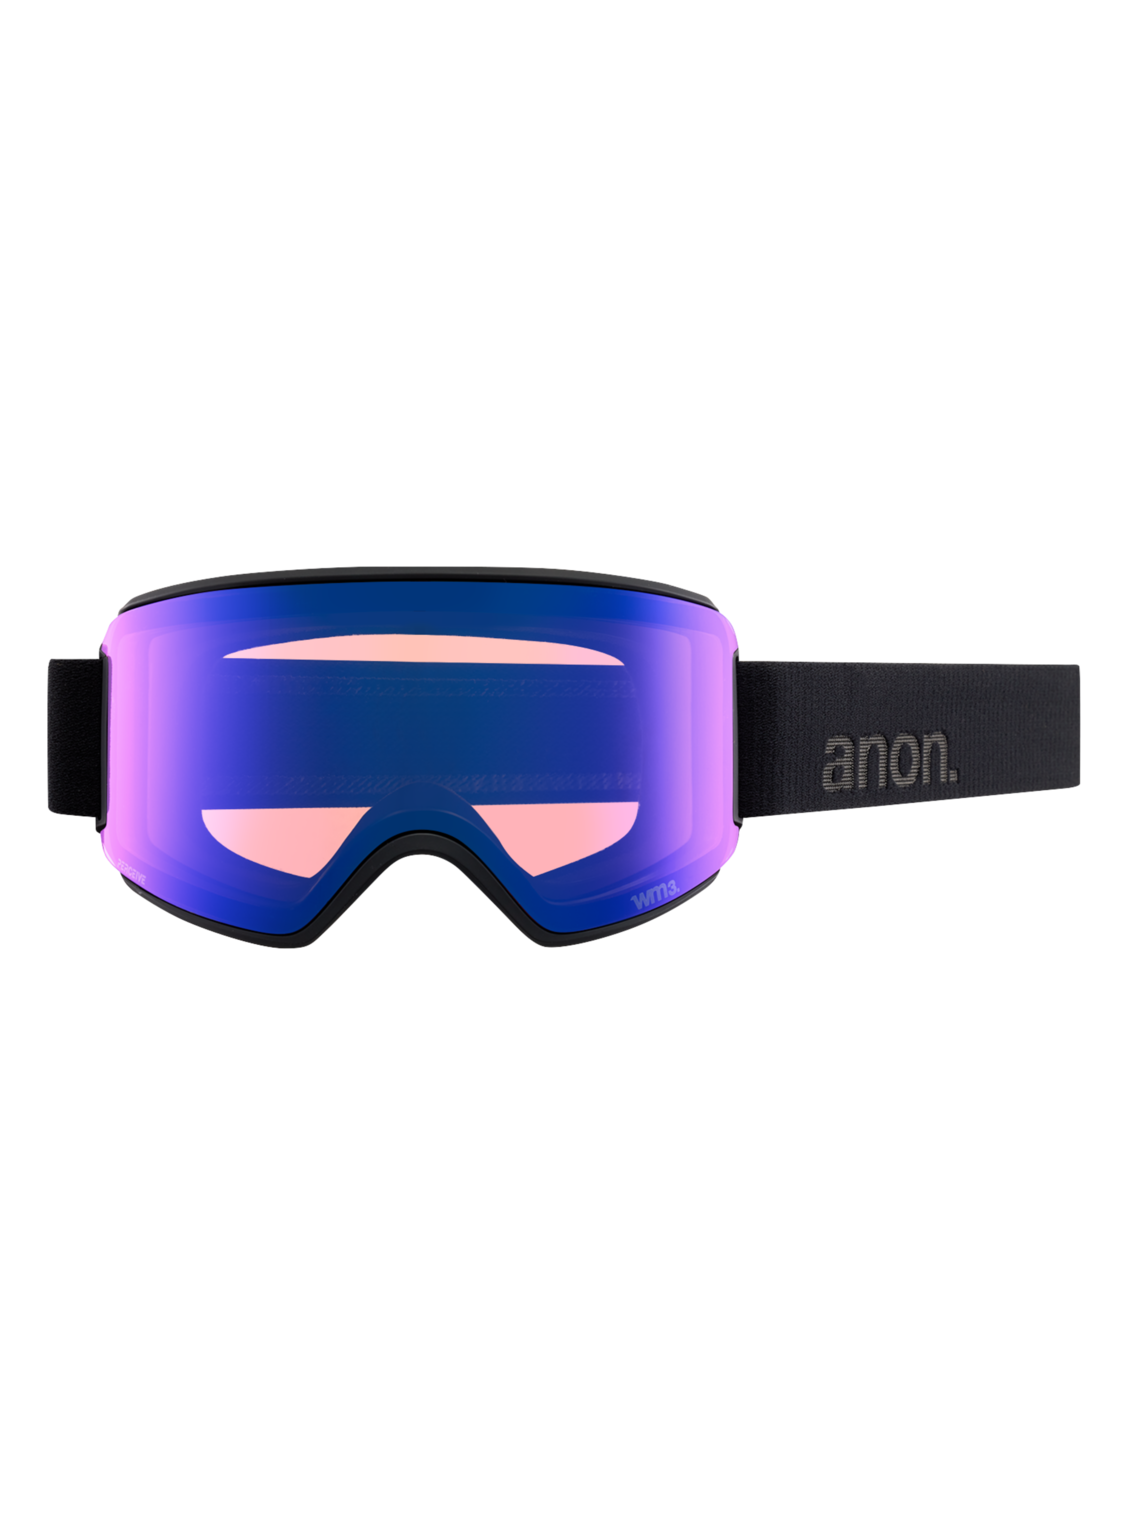 Anon WM3 goggle smoke / perceive sunny onyx (including extra lens and MFI mask)